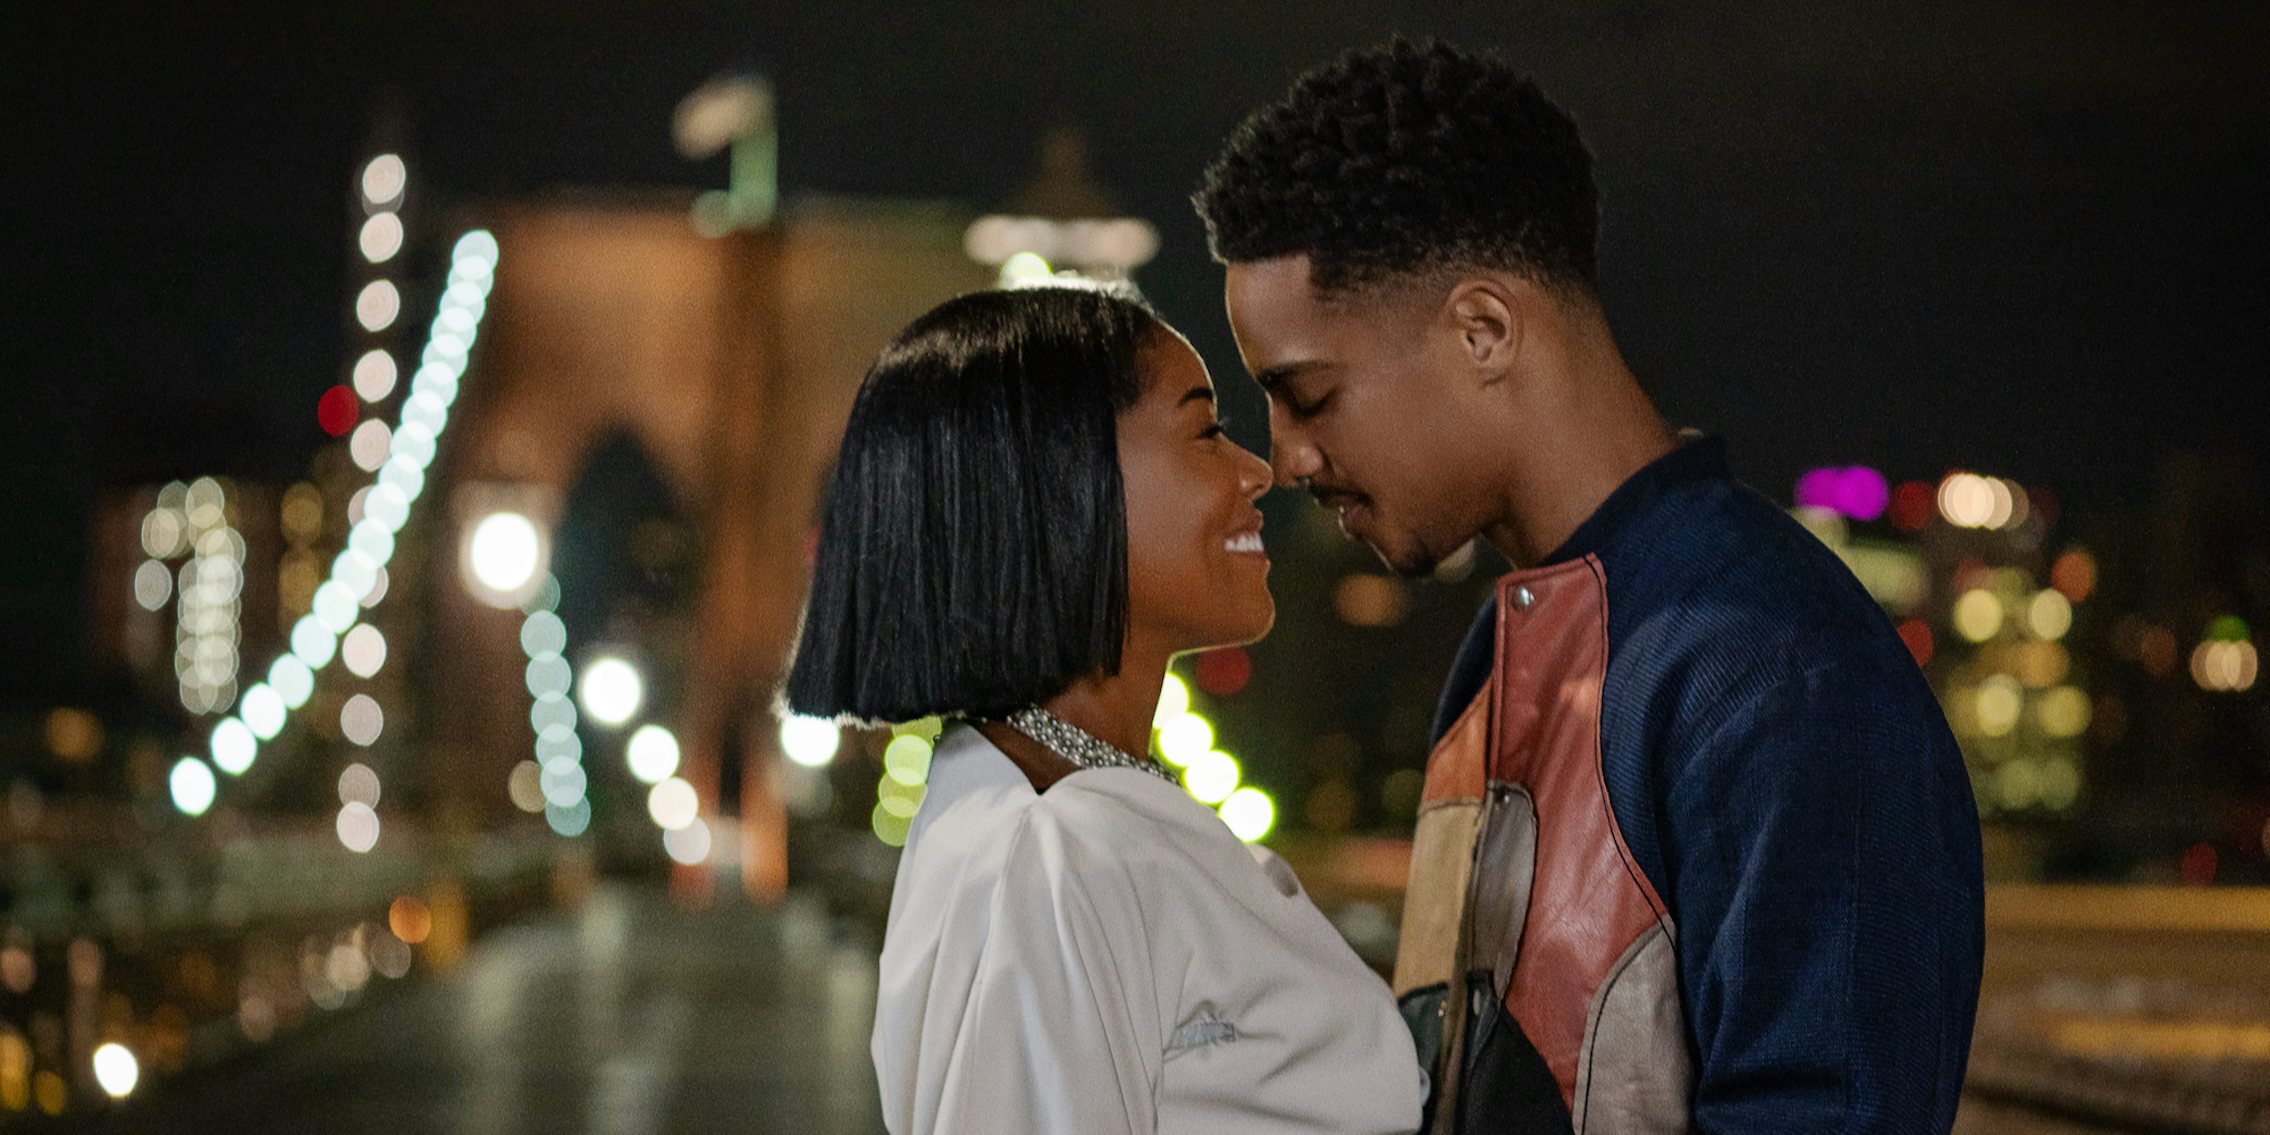 gabrielle union (left) and keith powers (right) in the perfect find